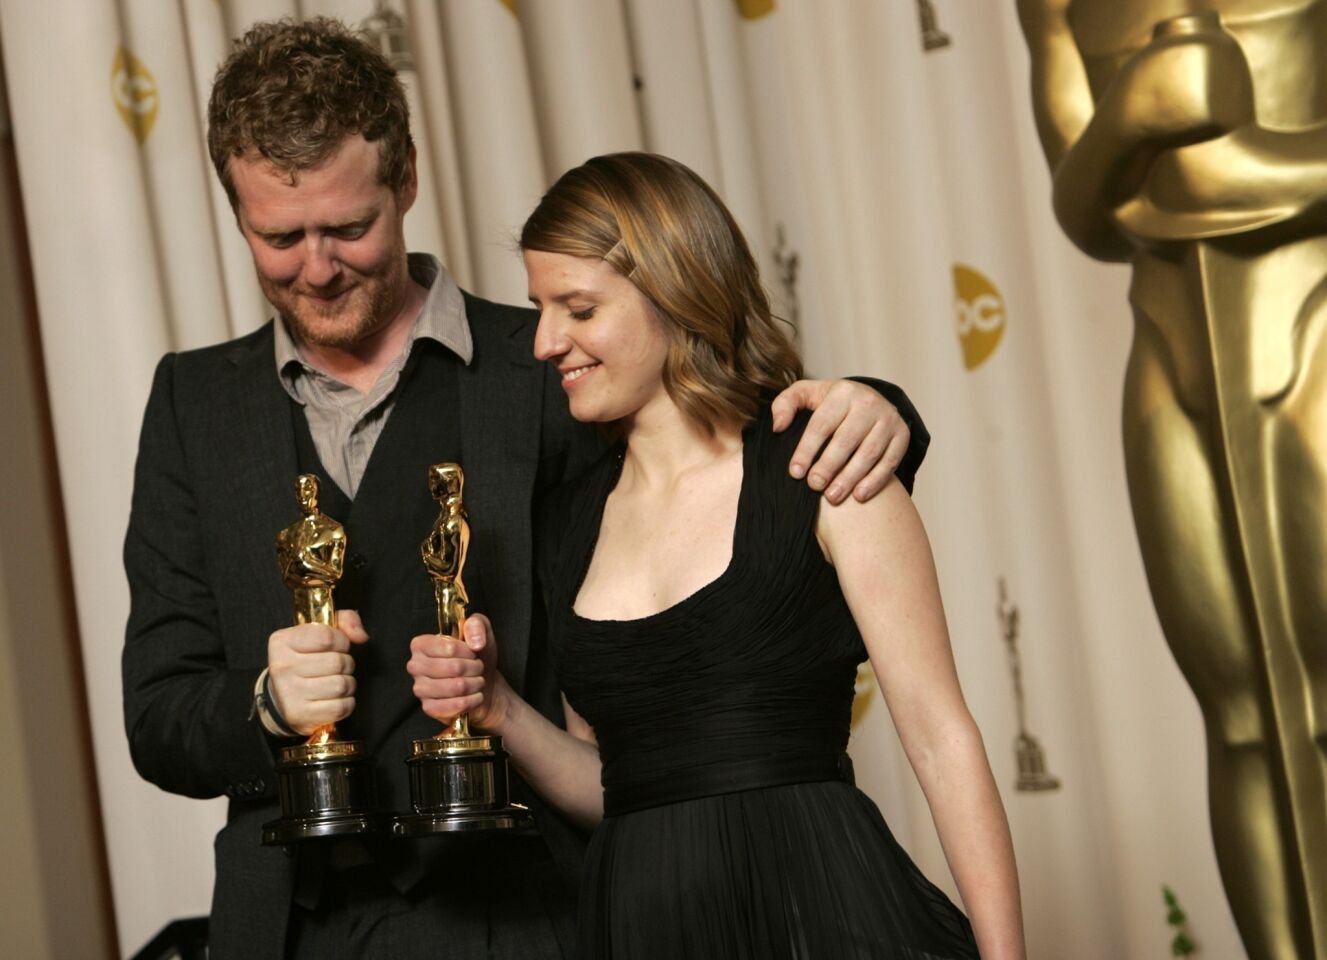 When Glenn Hansard and Markéta Irglová won the award for original song for "Falling Slowly" at the 80th Academy Awards, both were overcome with emotions. Hansard took the mike first. When Irglová leaned in to give her own thanks, the show cut her off. Host Jon Stewart later called her back.